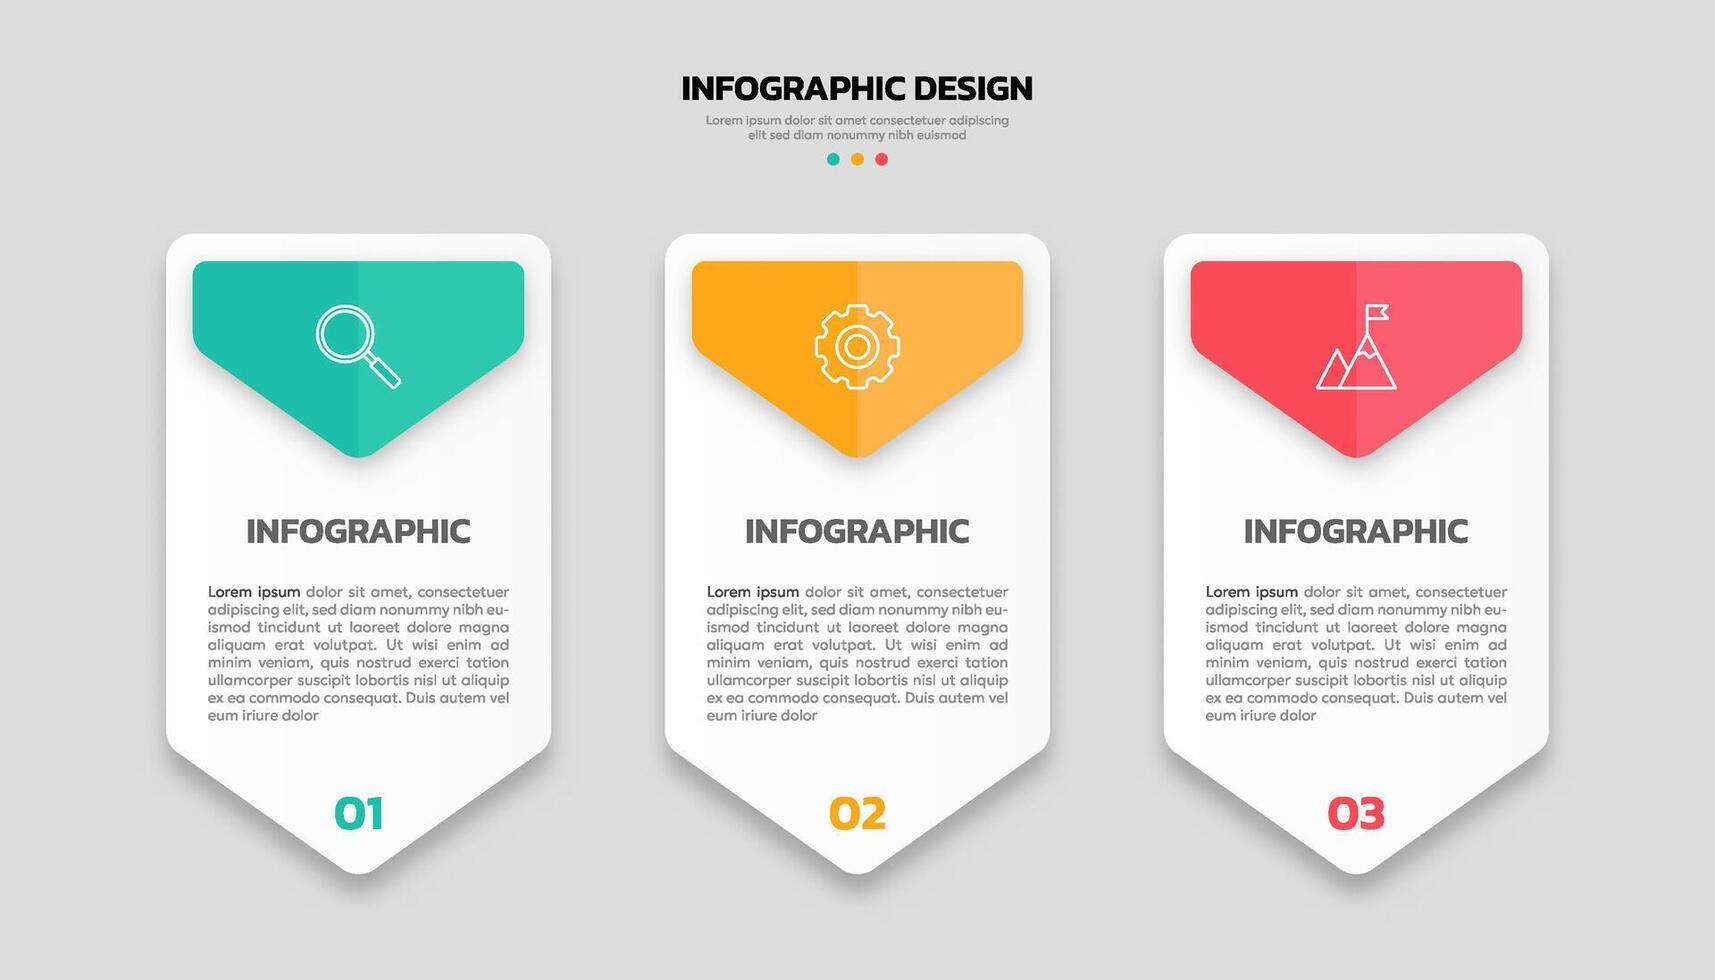 Modern business infographic template with 3 options or steps icons. vector